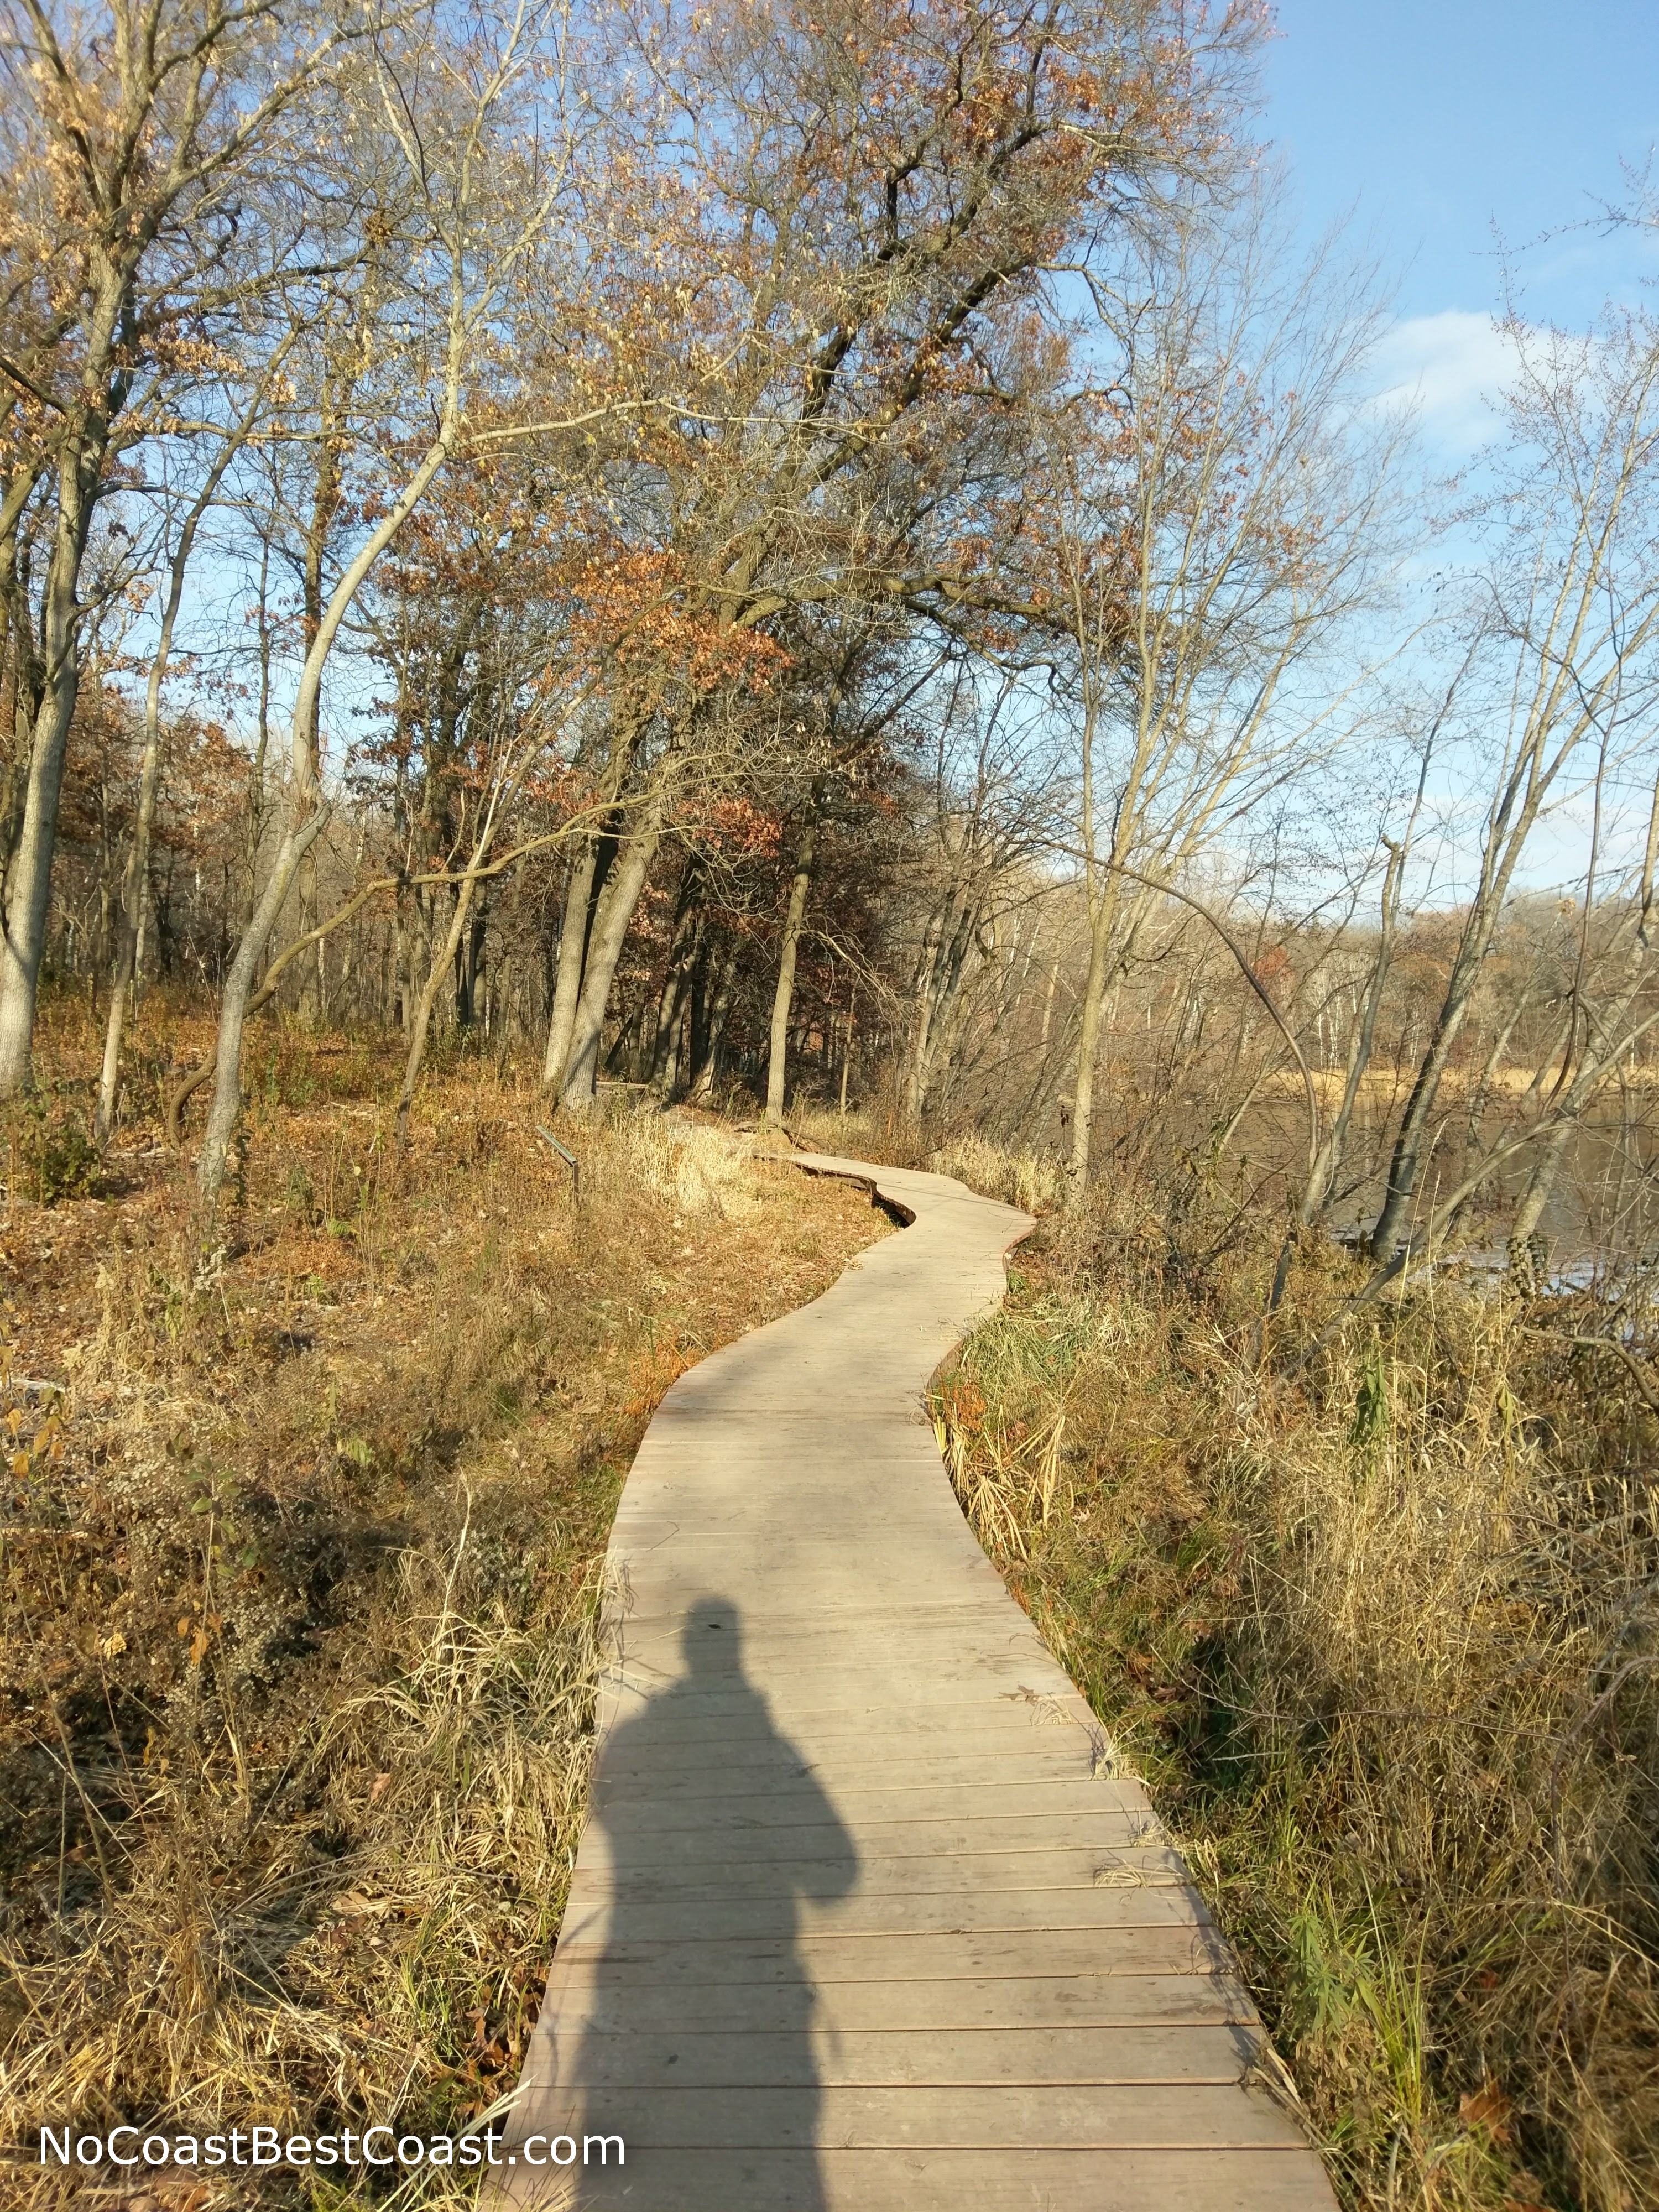 This brand new, curvy boardwalk adds some fun to your hike